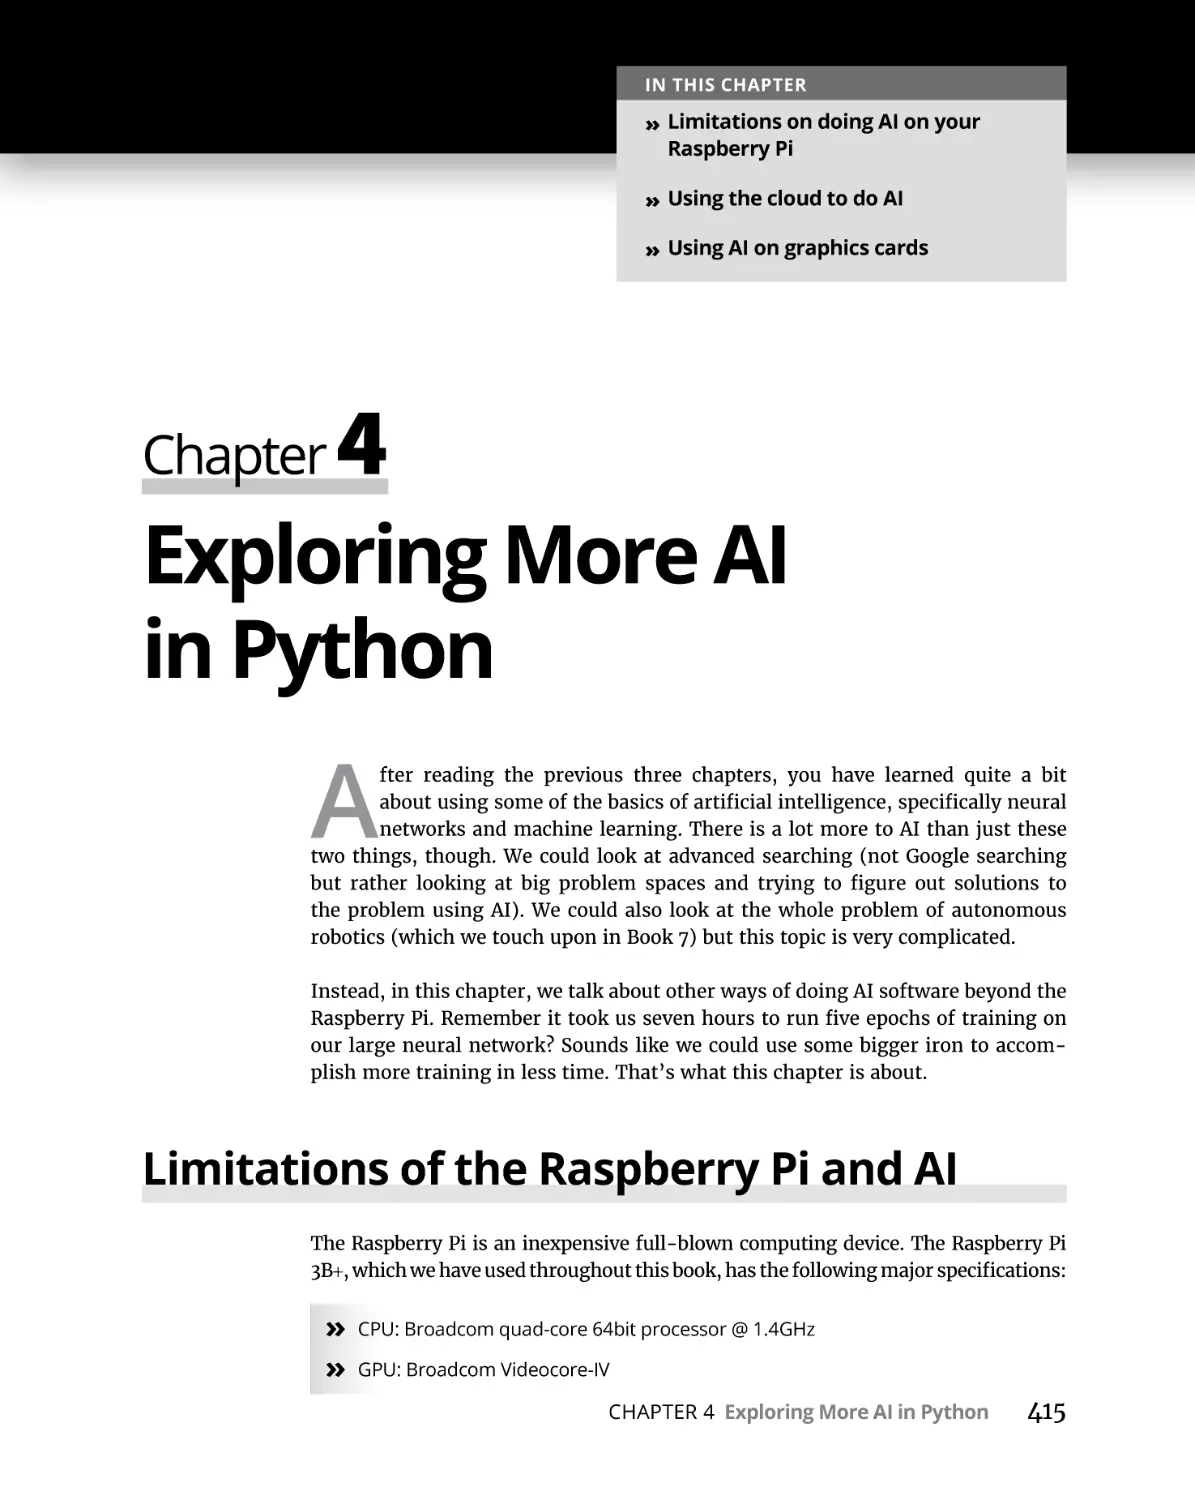 Chapter 4 Exploring More AI in Python
Limitations of the Raspberry Pi and AI